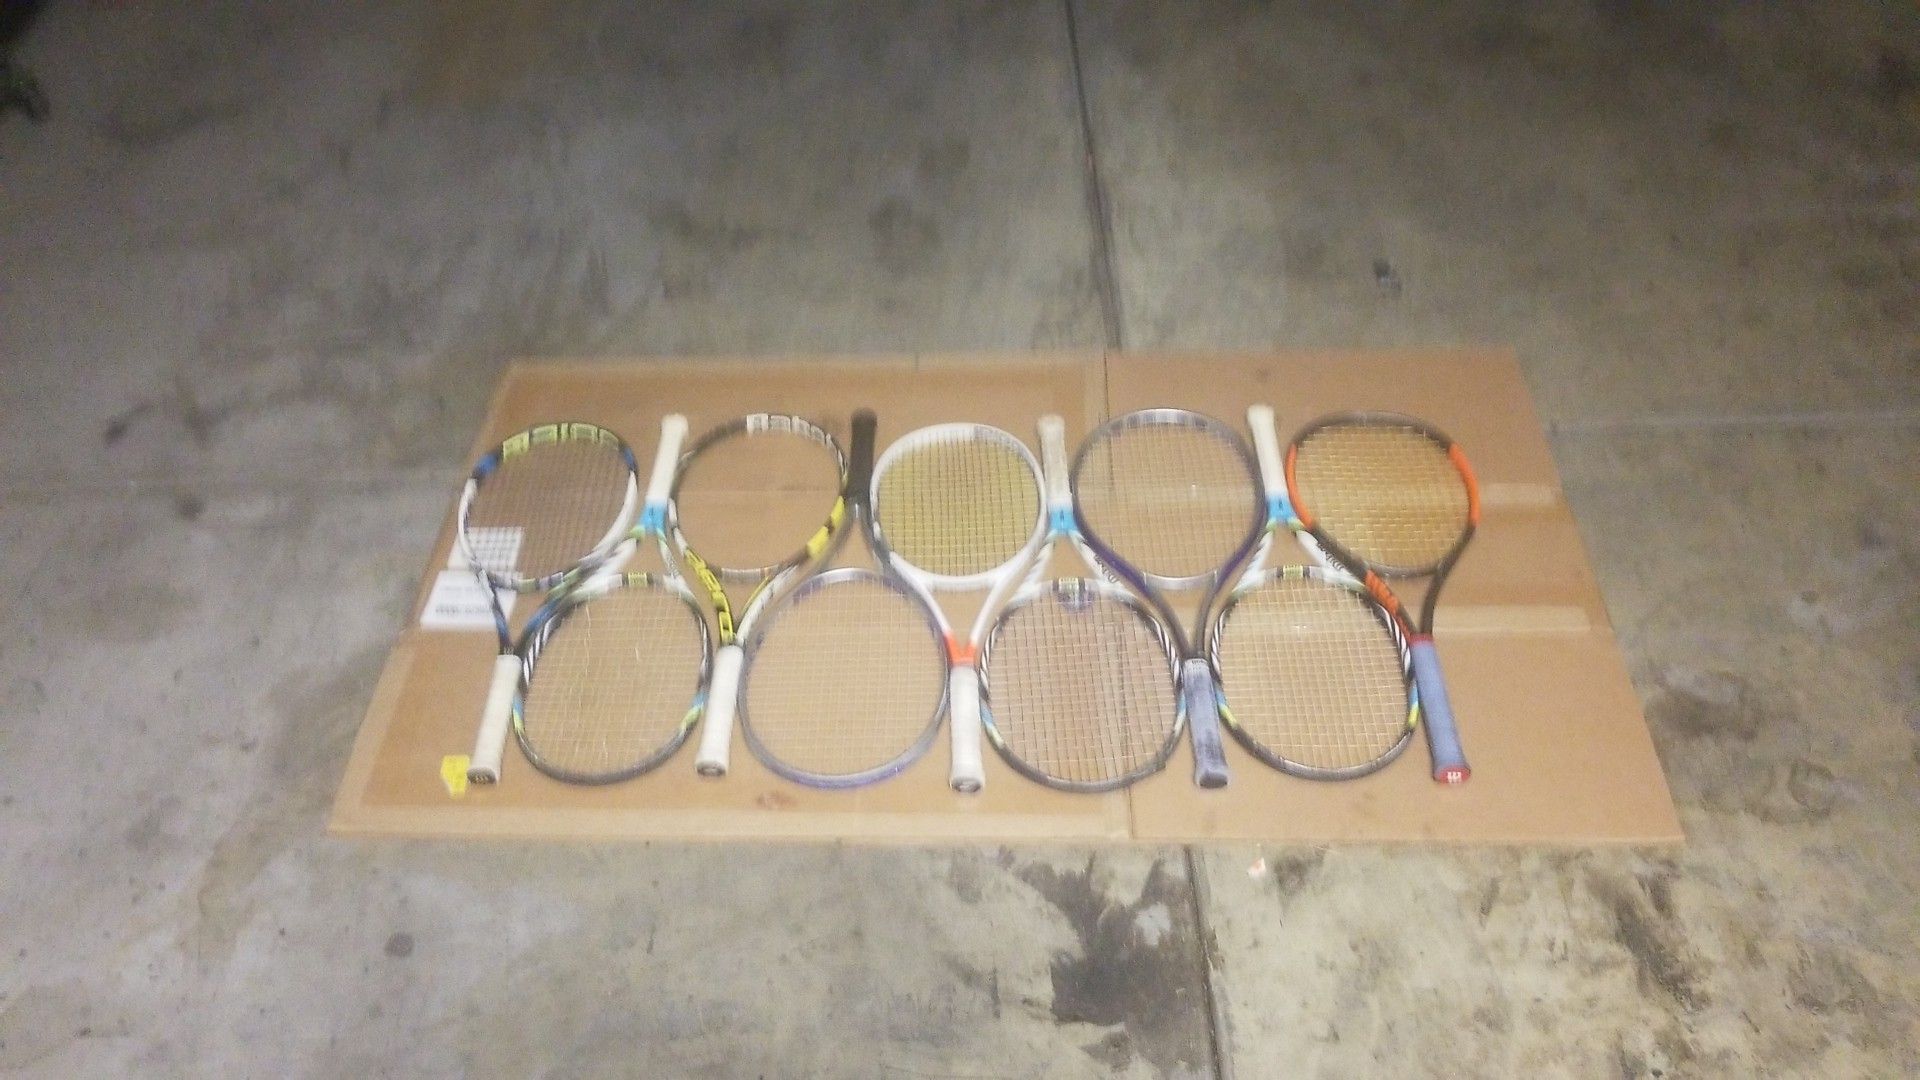 Set of 9 Tennis Raquets (for all 9 bundle)